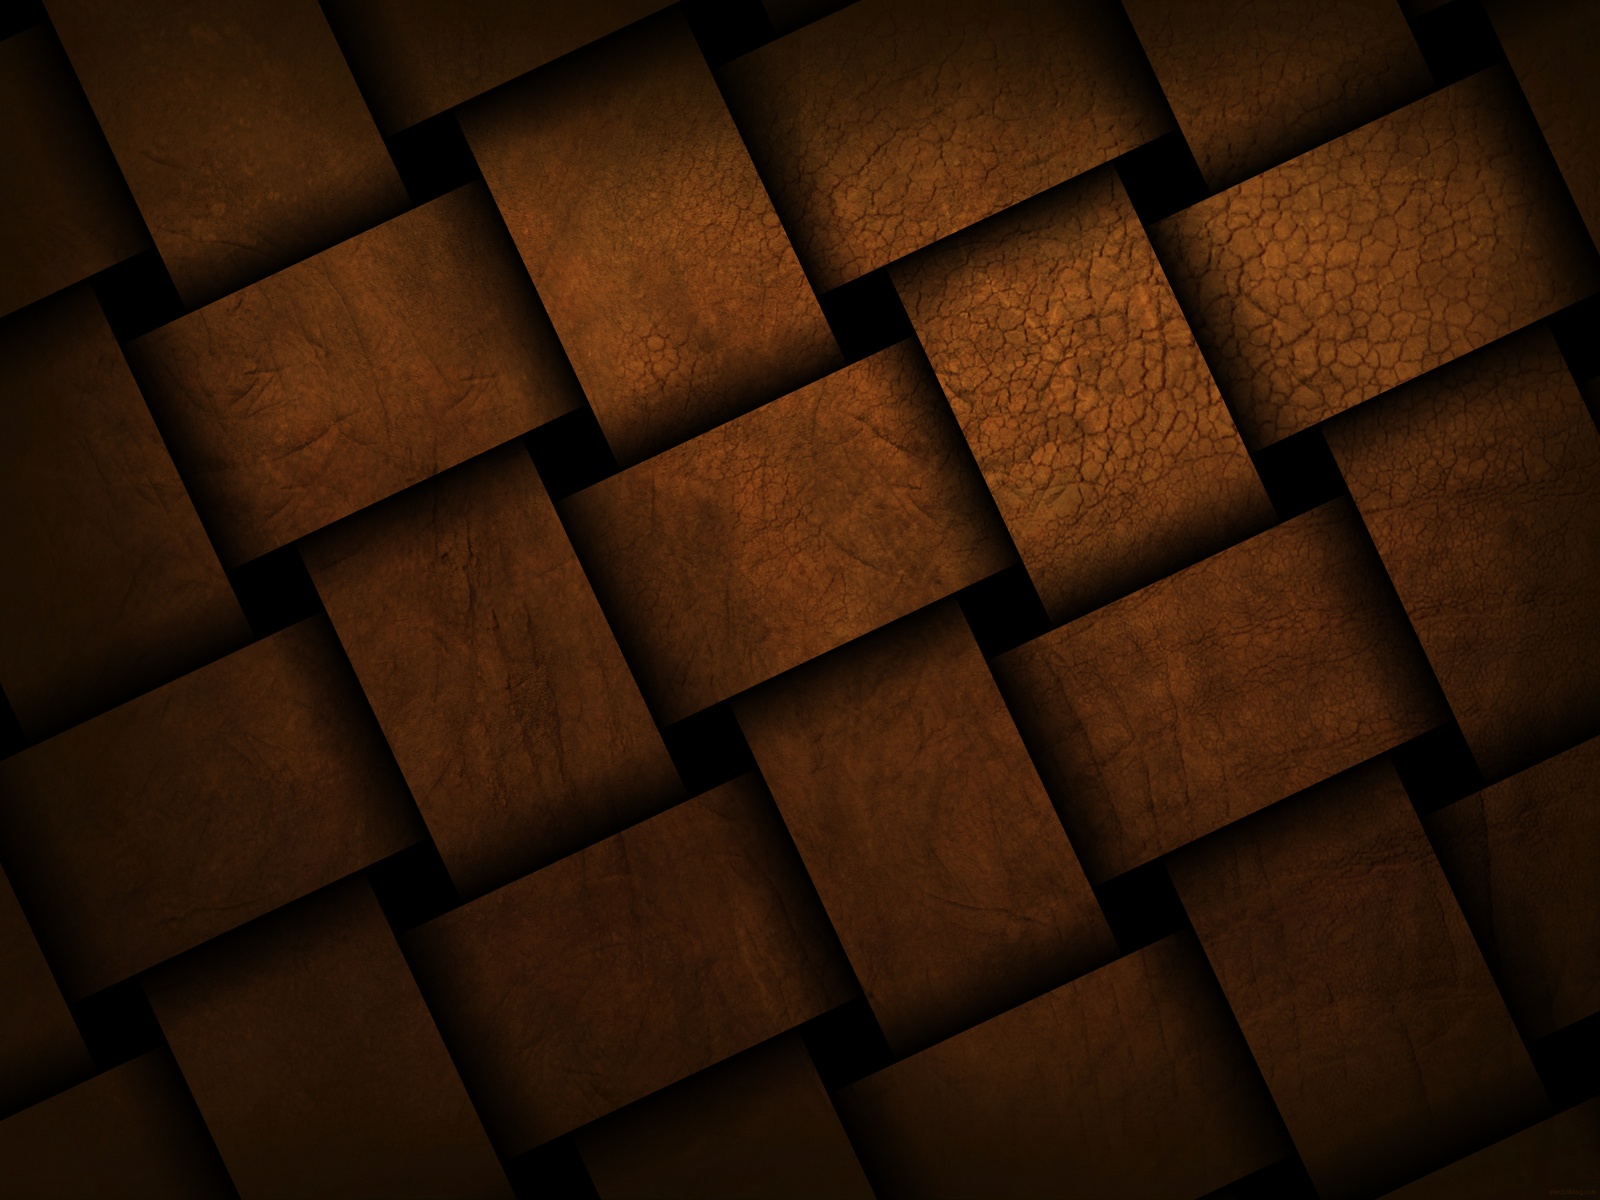  Brown Wallpaper Hd Android Desktop Abstract Iphone 5 Design Backgournd 1600x1200